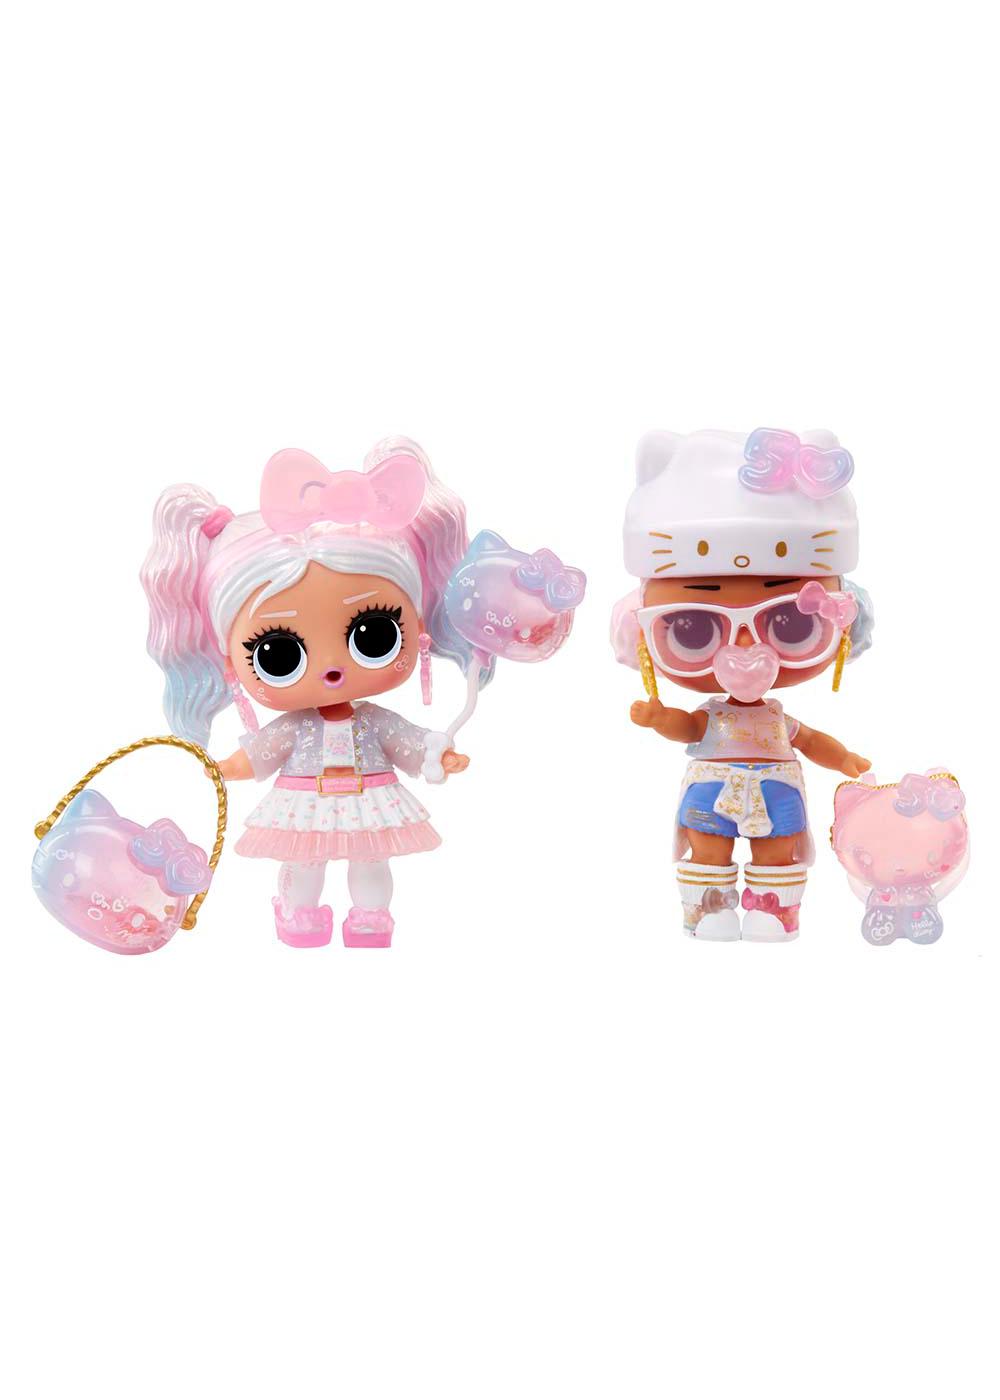 L.O.L. Surprise! Loves Hello Kitty Tots 50th Anniversary Capsule; image 5 of 5